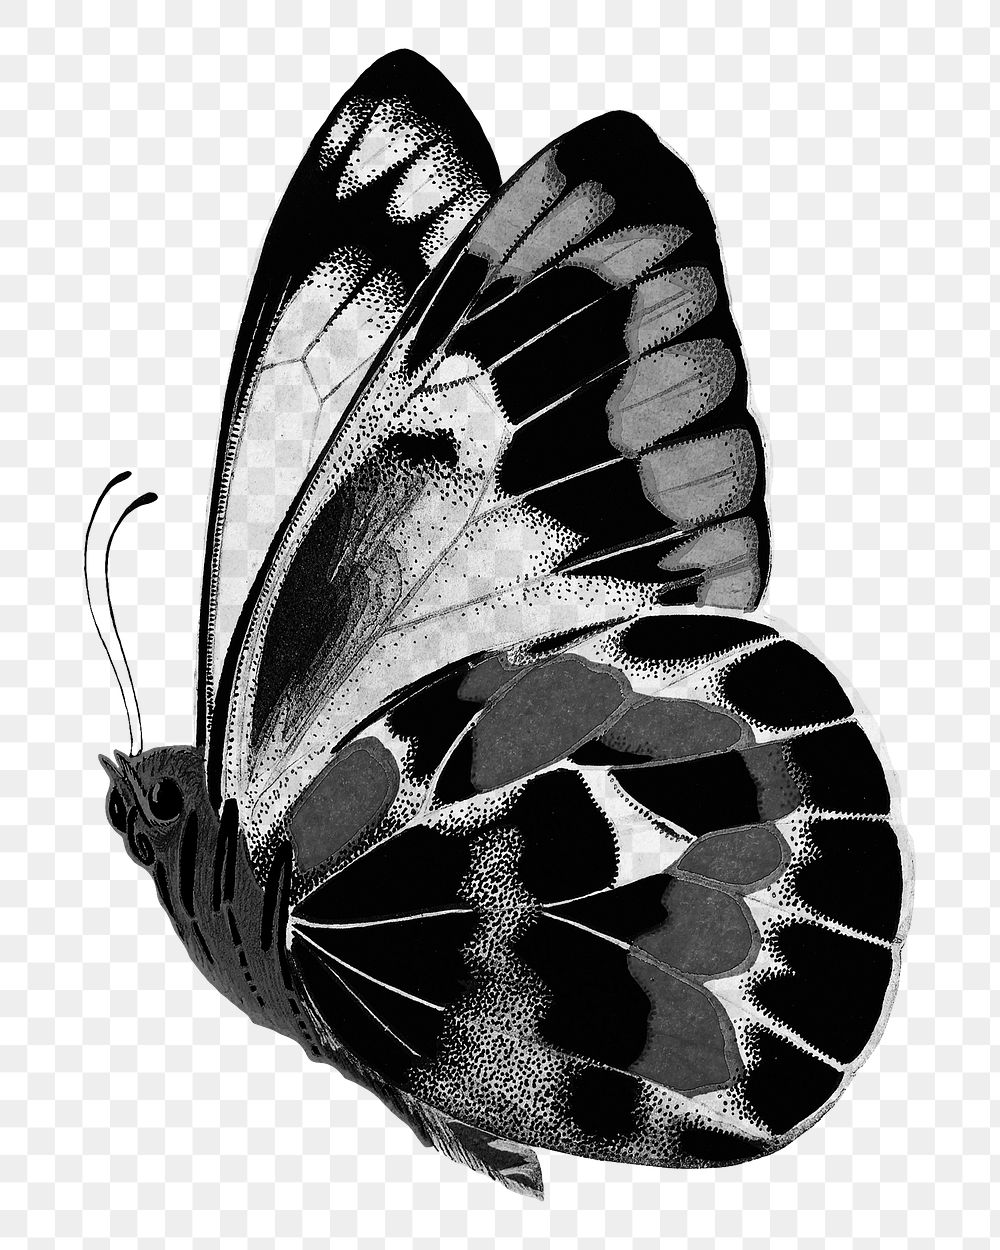 Black butterfly png sticker, vintage insect on transparent background. Remixed from the artwork of E.A. Séguy.